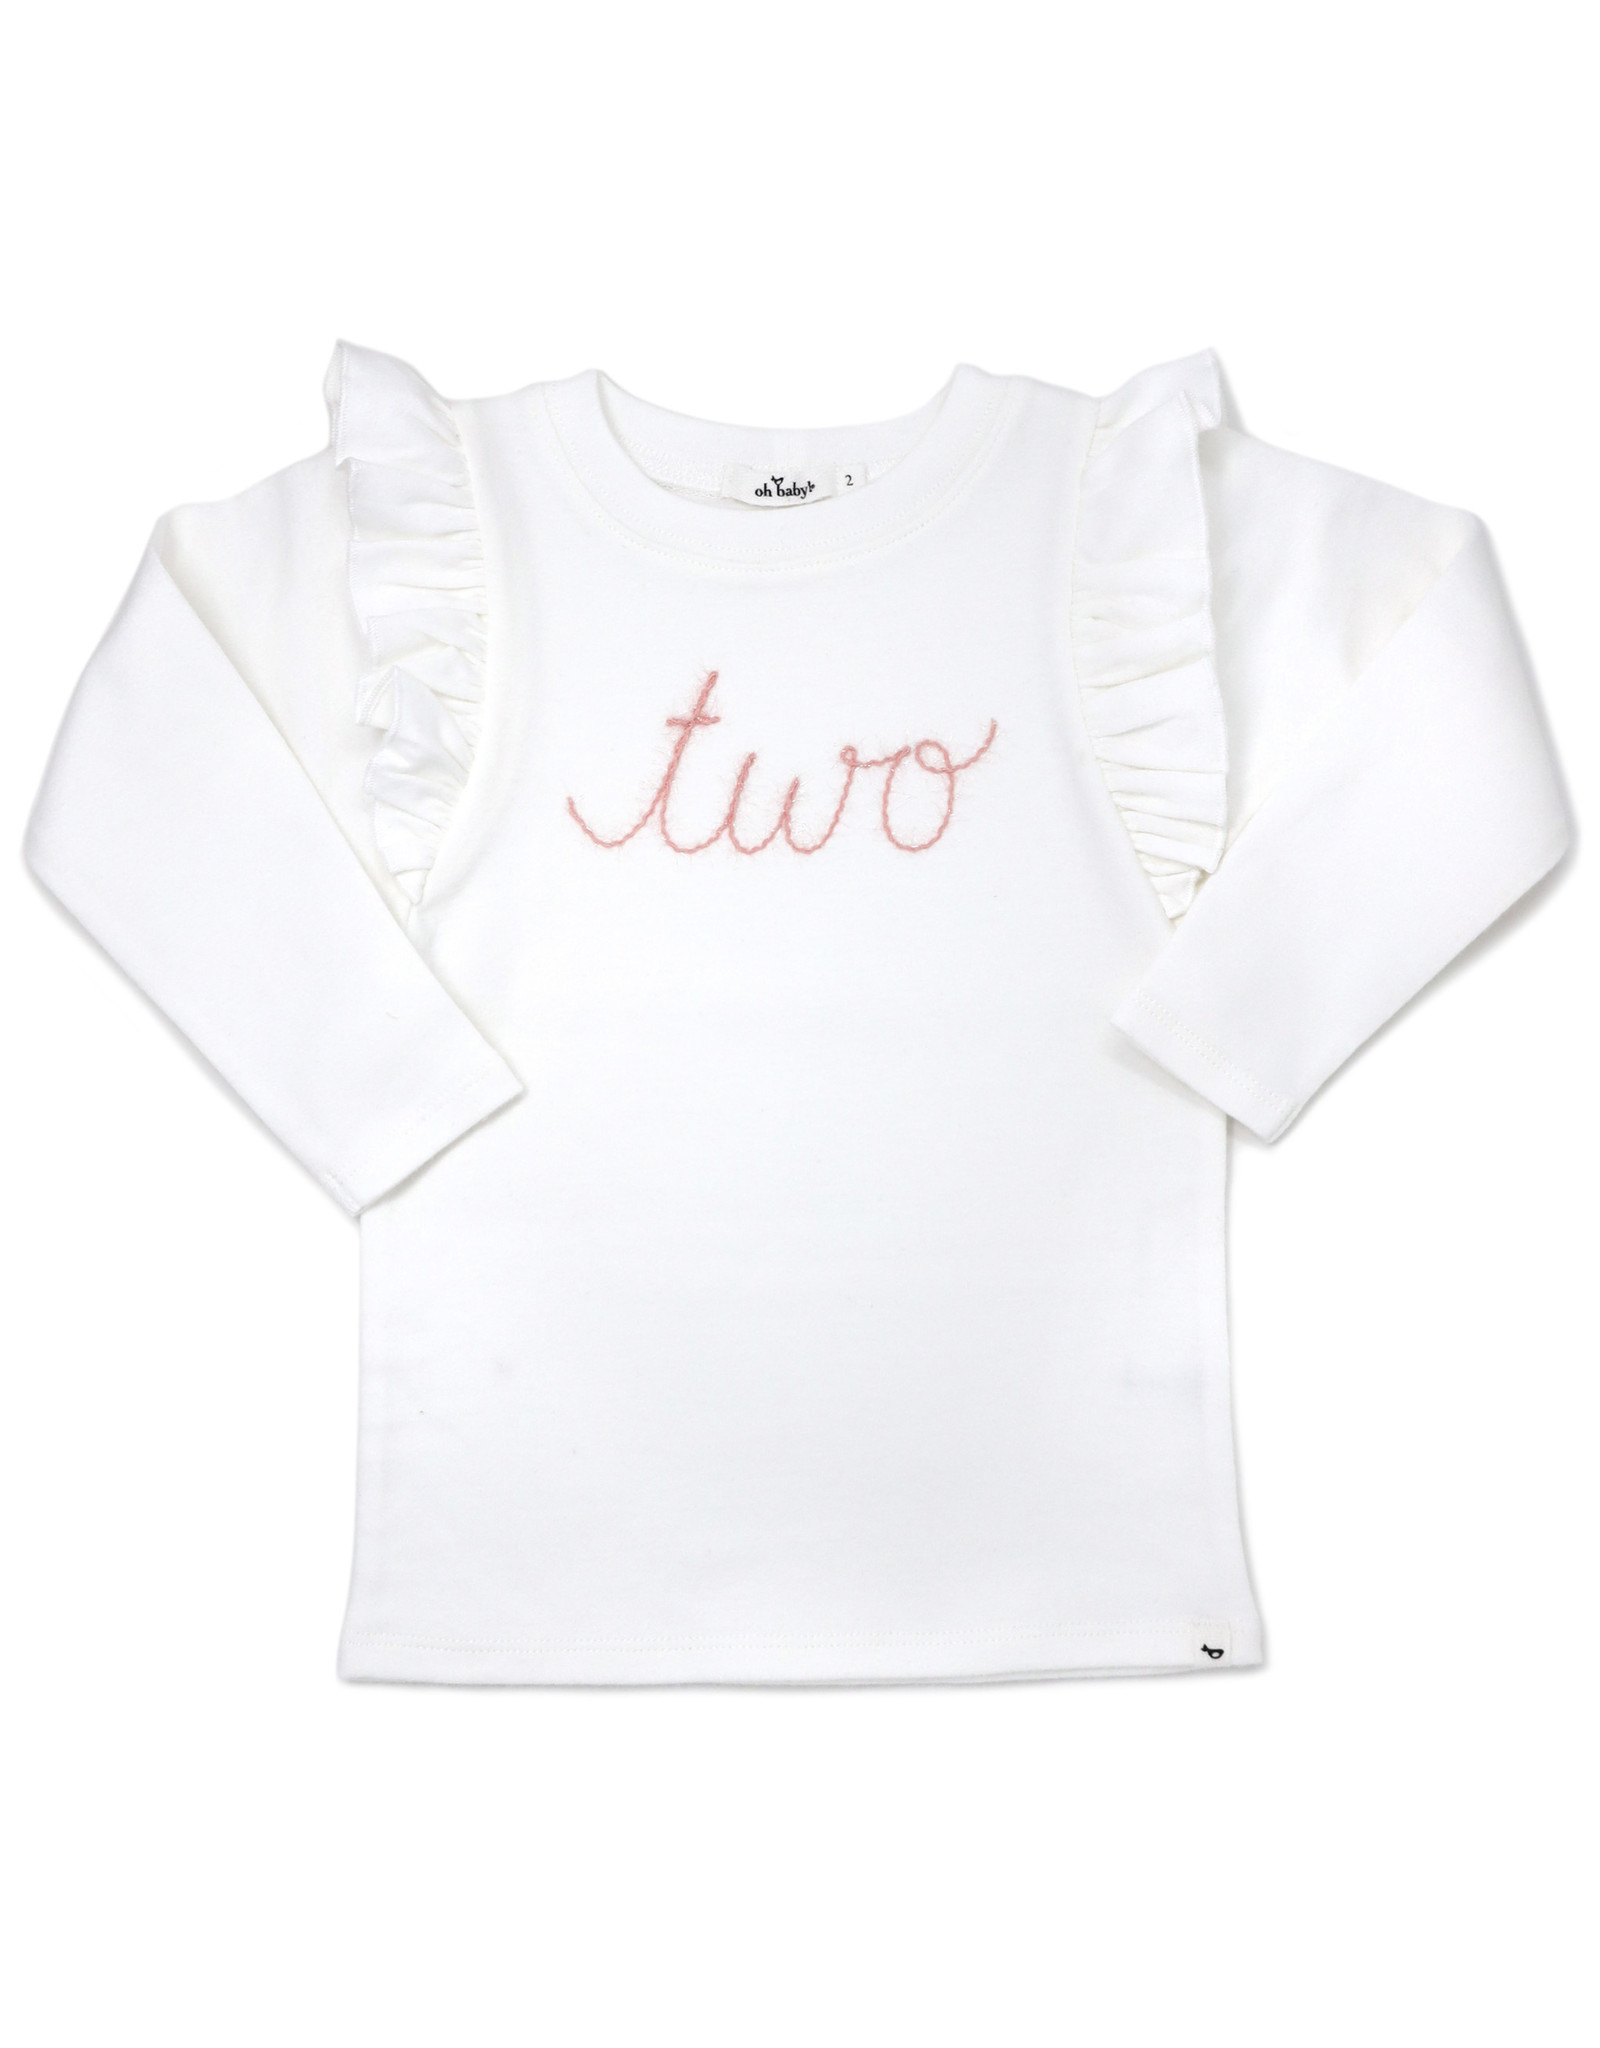 OB Baby Girl "Two" Millie Tee